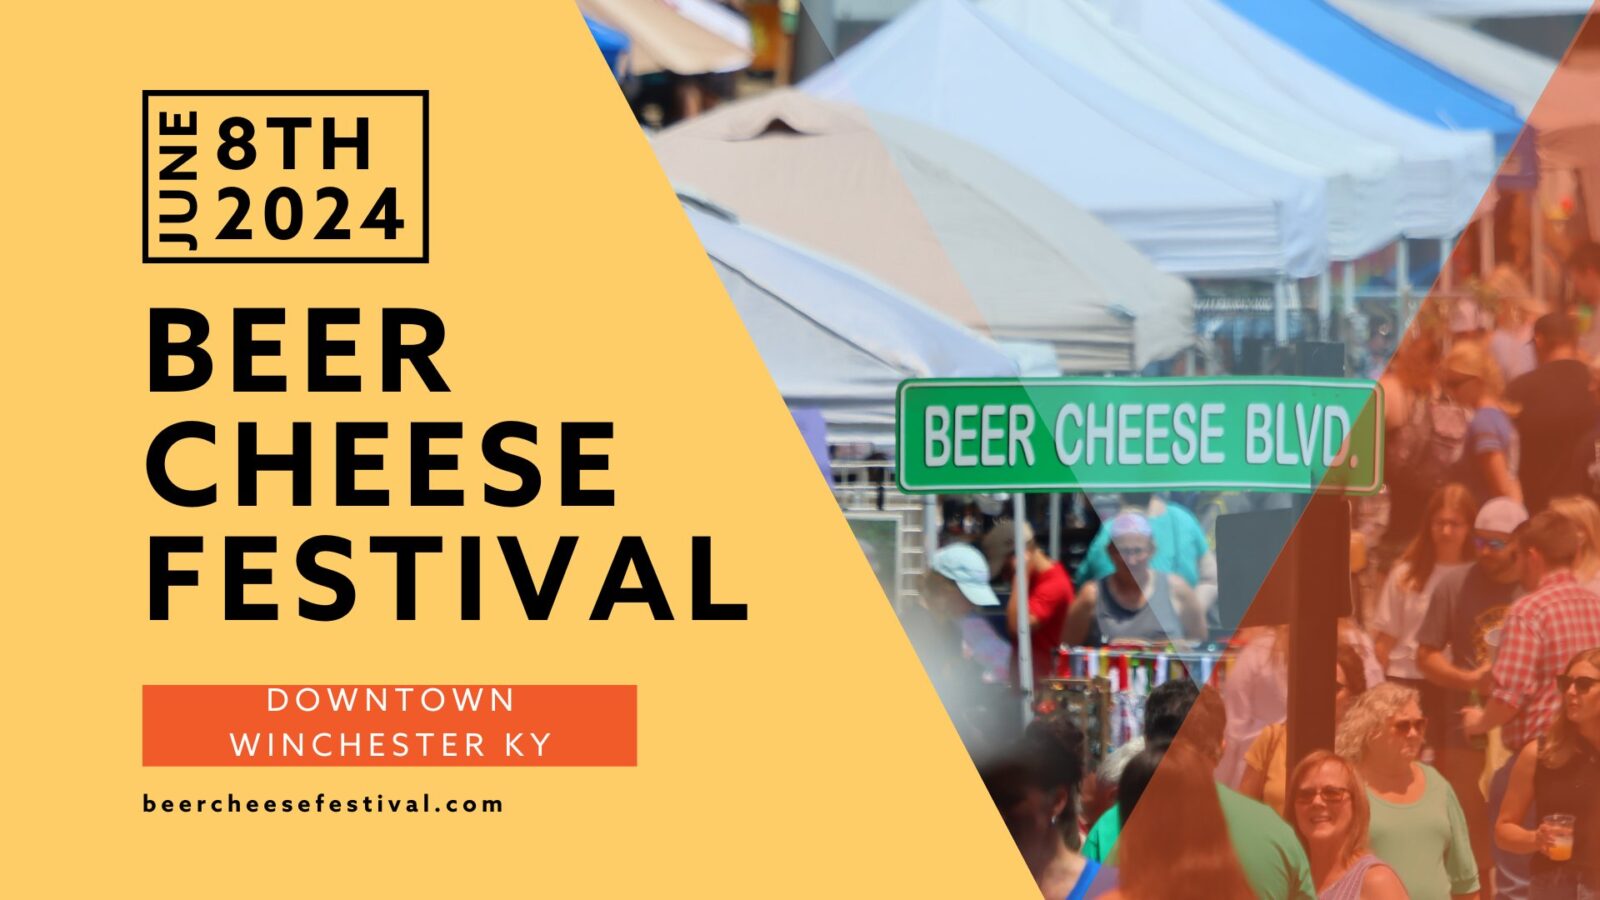 14th Annual Beer Cheese Festival June 8th, 2024 Visit Winchester